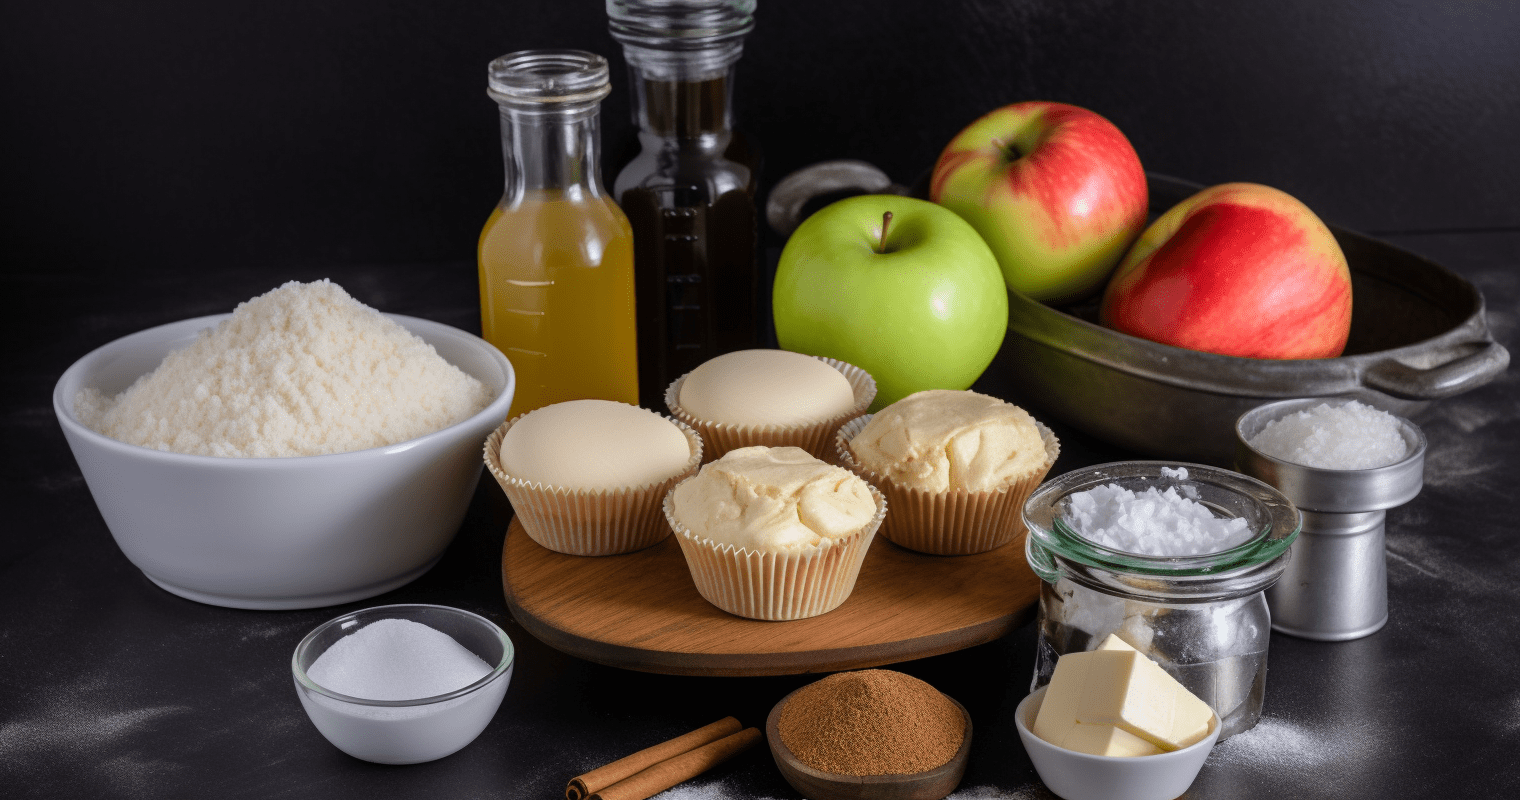 Apple Pie Cupcakes Cooking Instructions